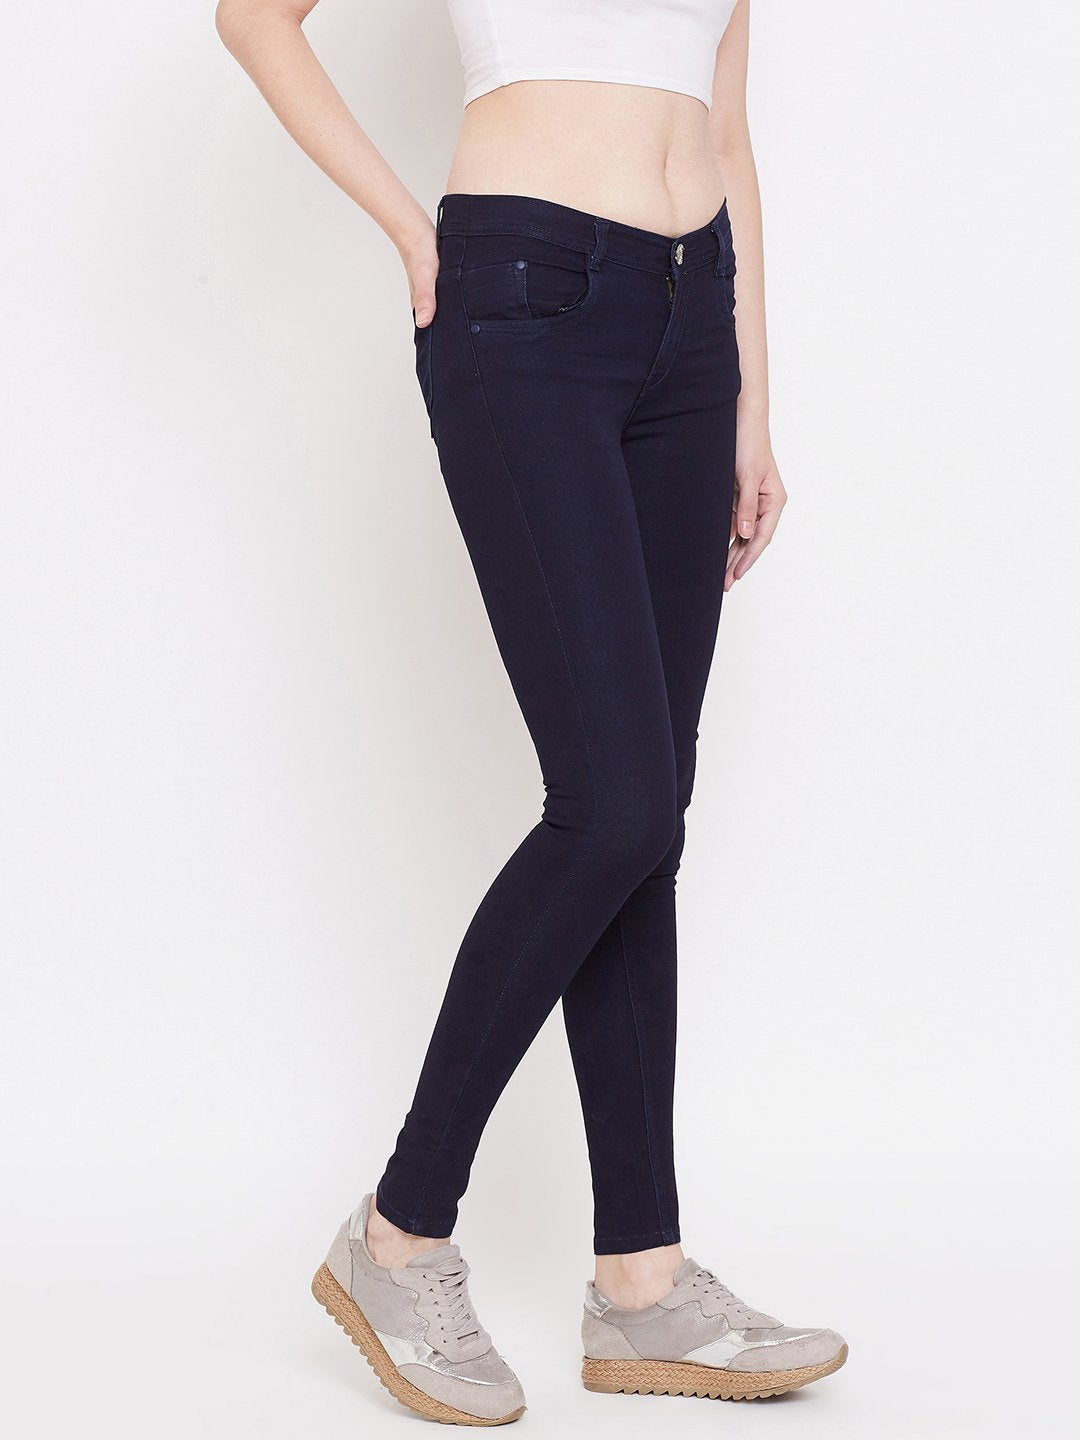 Slim Fit Stretchable Carbon Blue Jeans - NiftyJeans